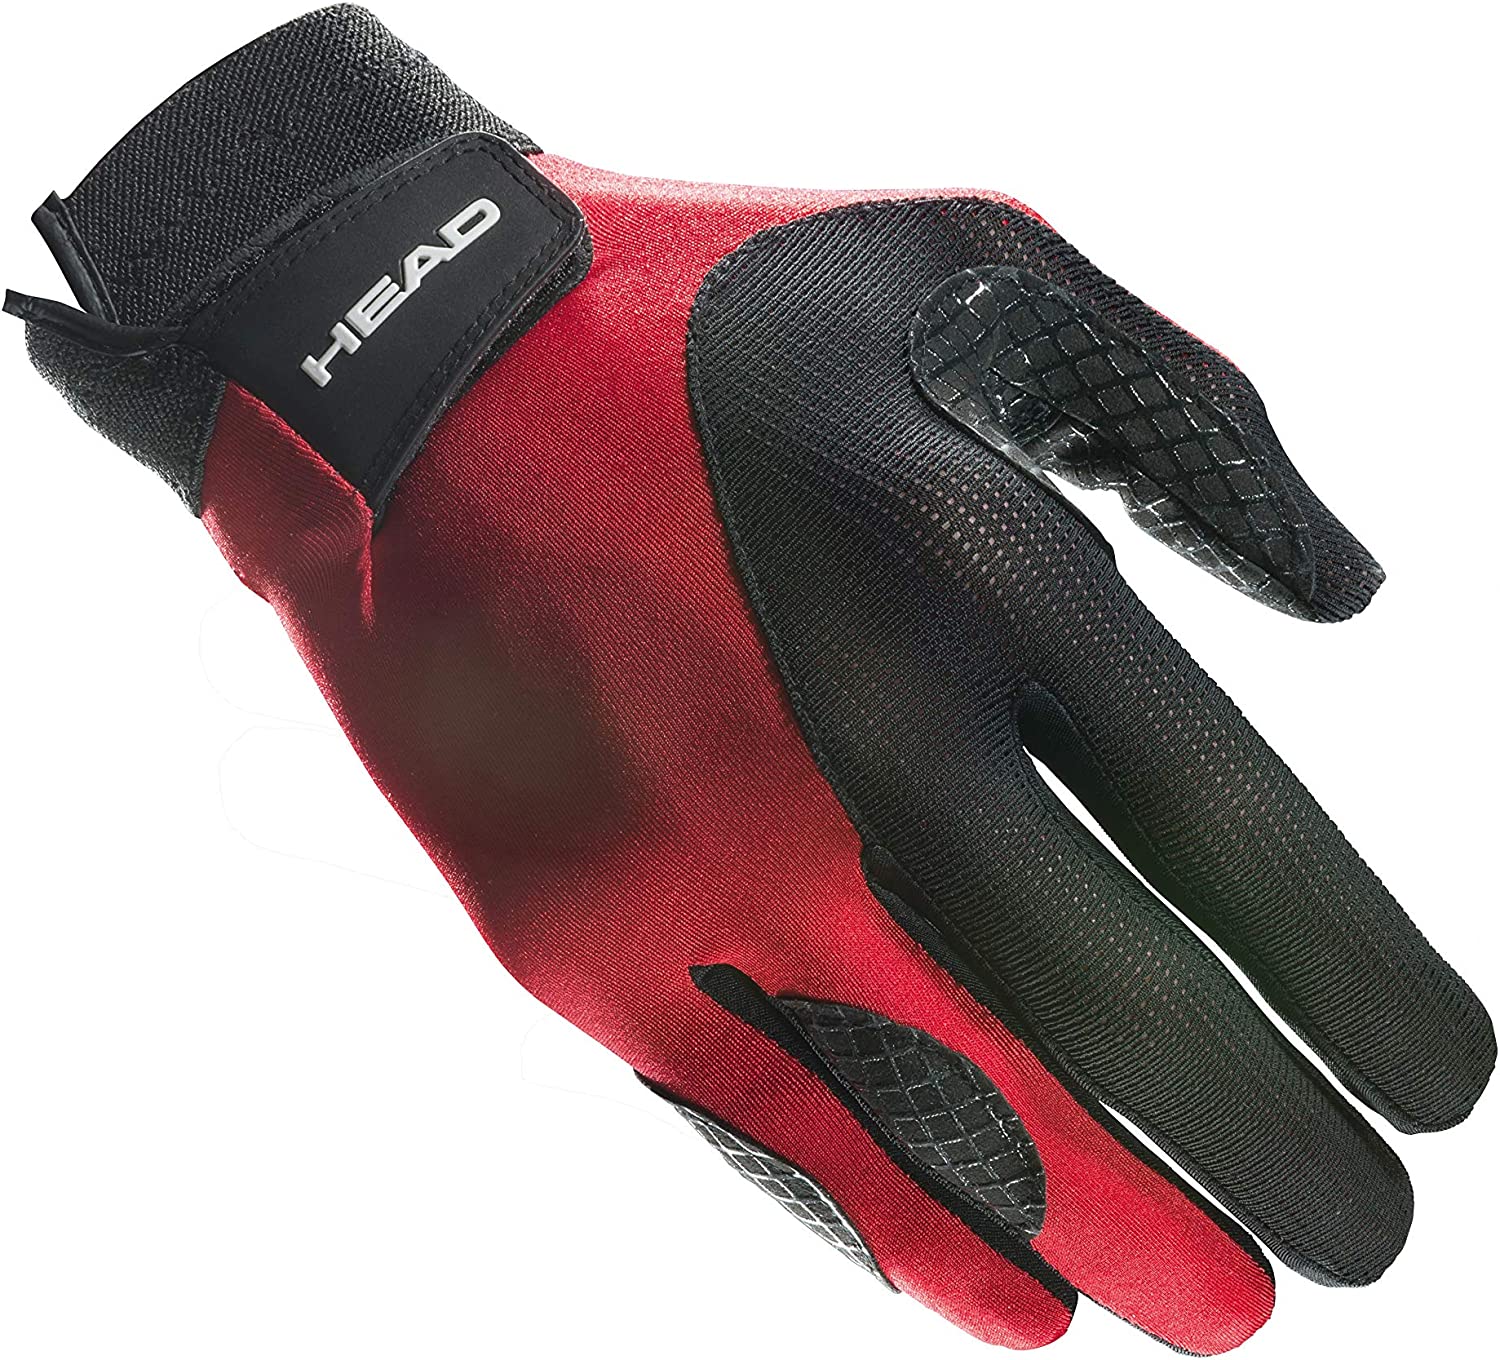 Head Leather Racquetball Glove reviews